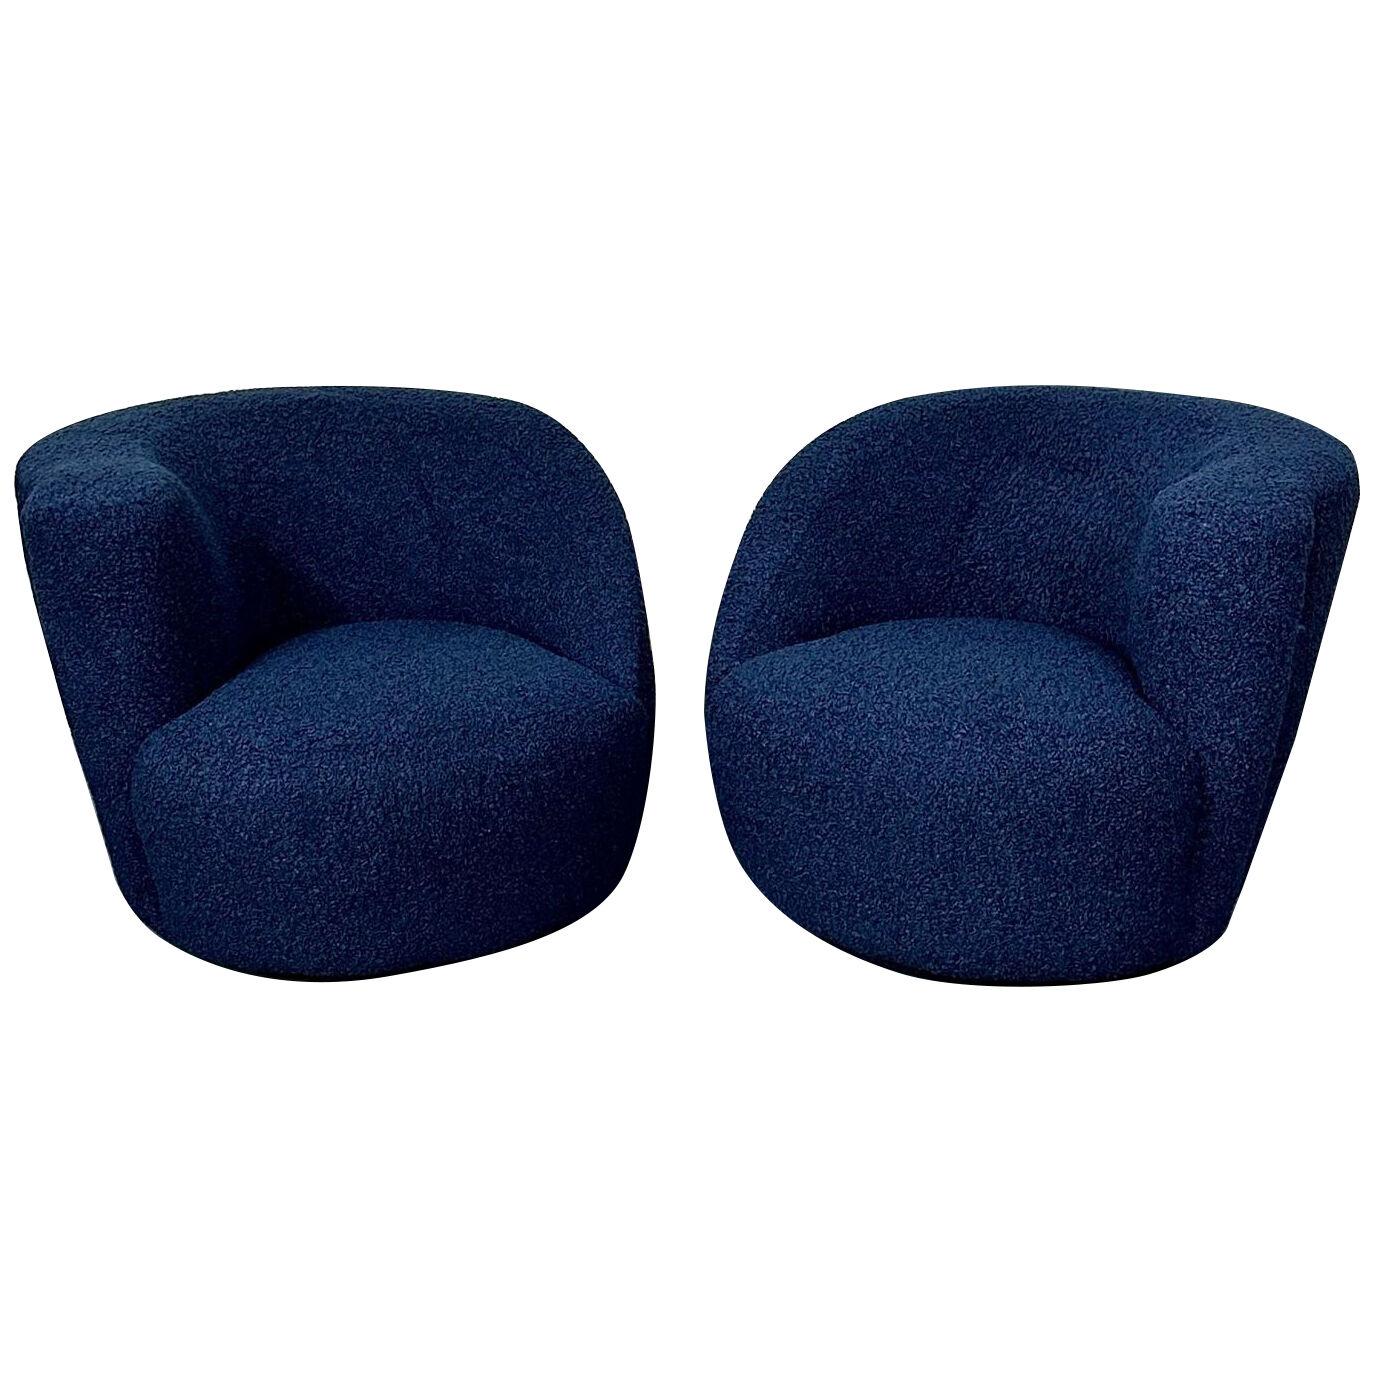 Pair of Mid-Century Modern Nautilus Style Swivel / Lounge Chairs, Blue Faux Fur